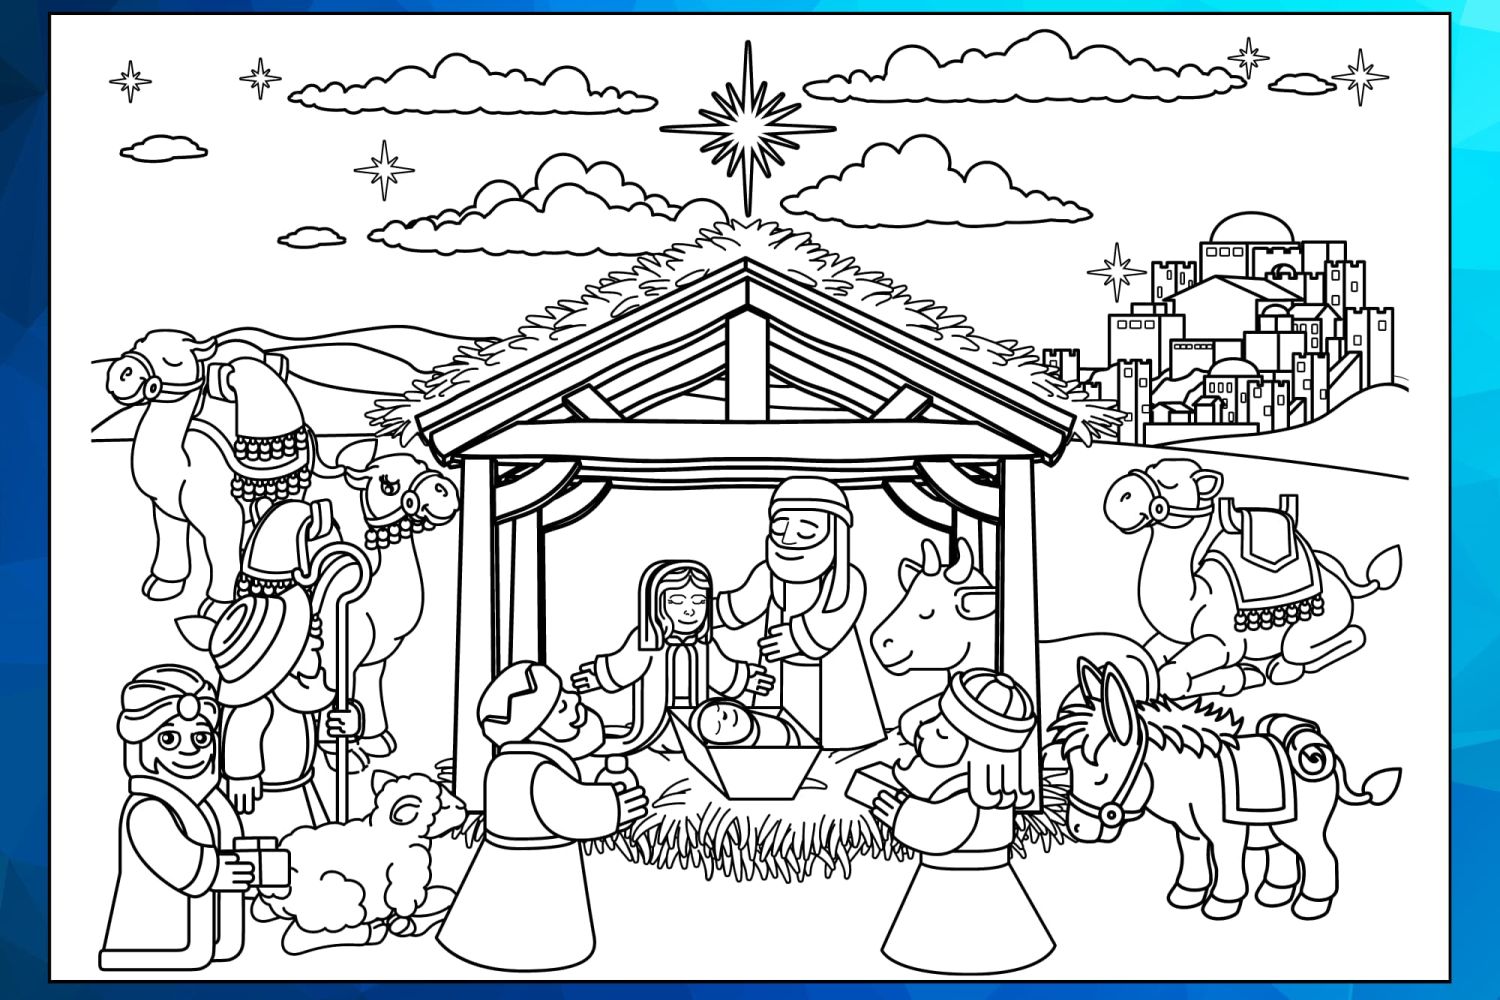 Nativity%20Scene%20Christmas%20Coloring%20Pages%20Worksheet%201-175b3fa4 Jesus (of Nazareth)